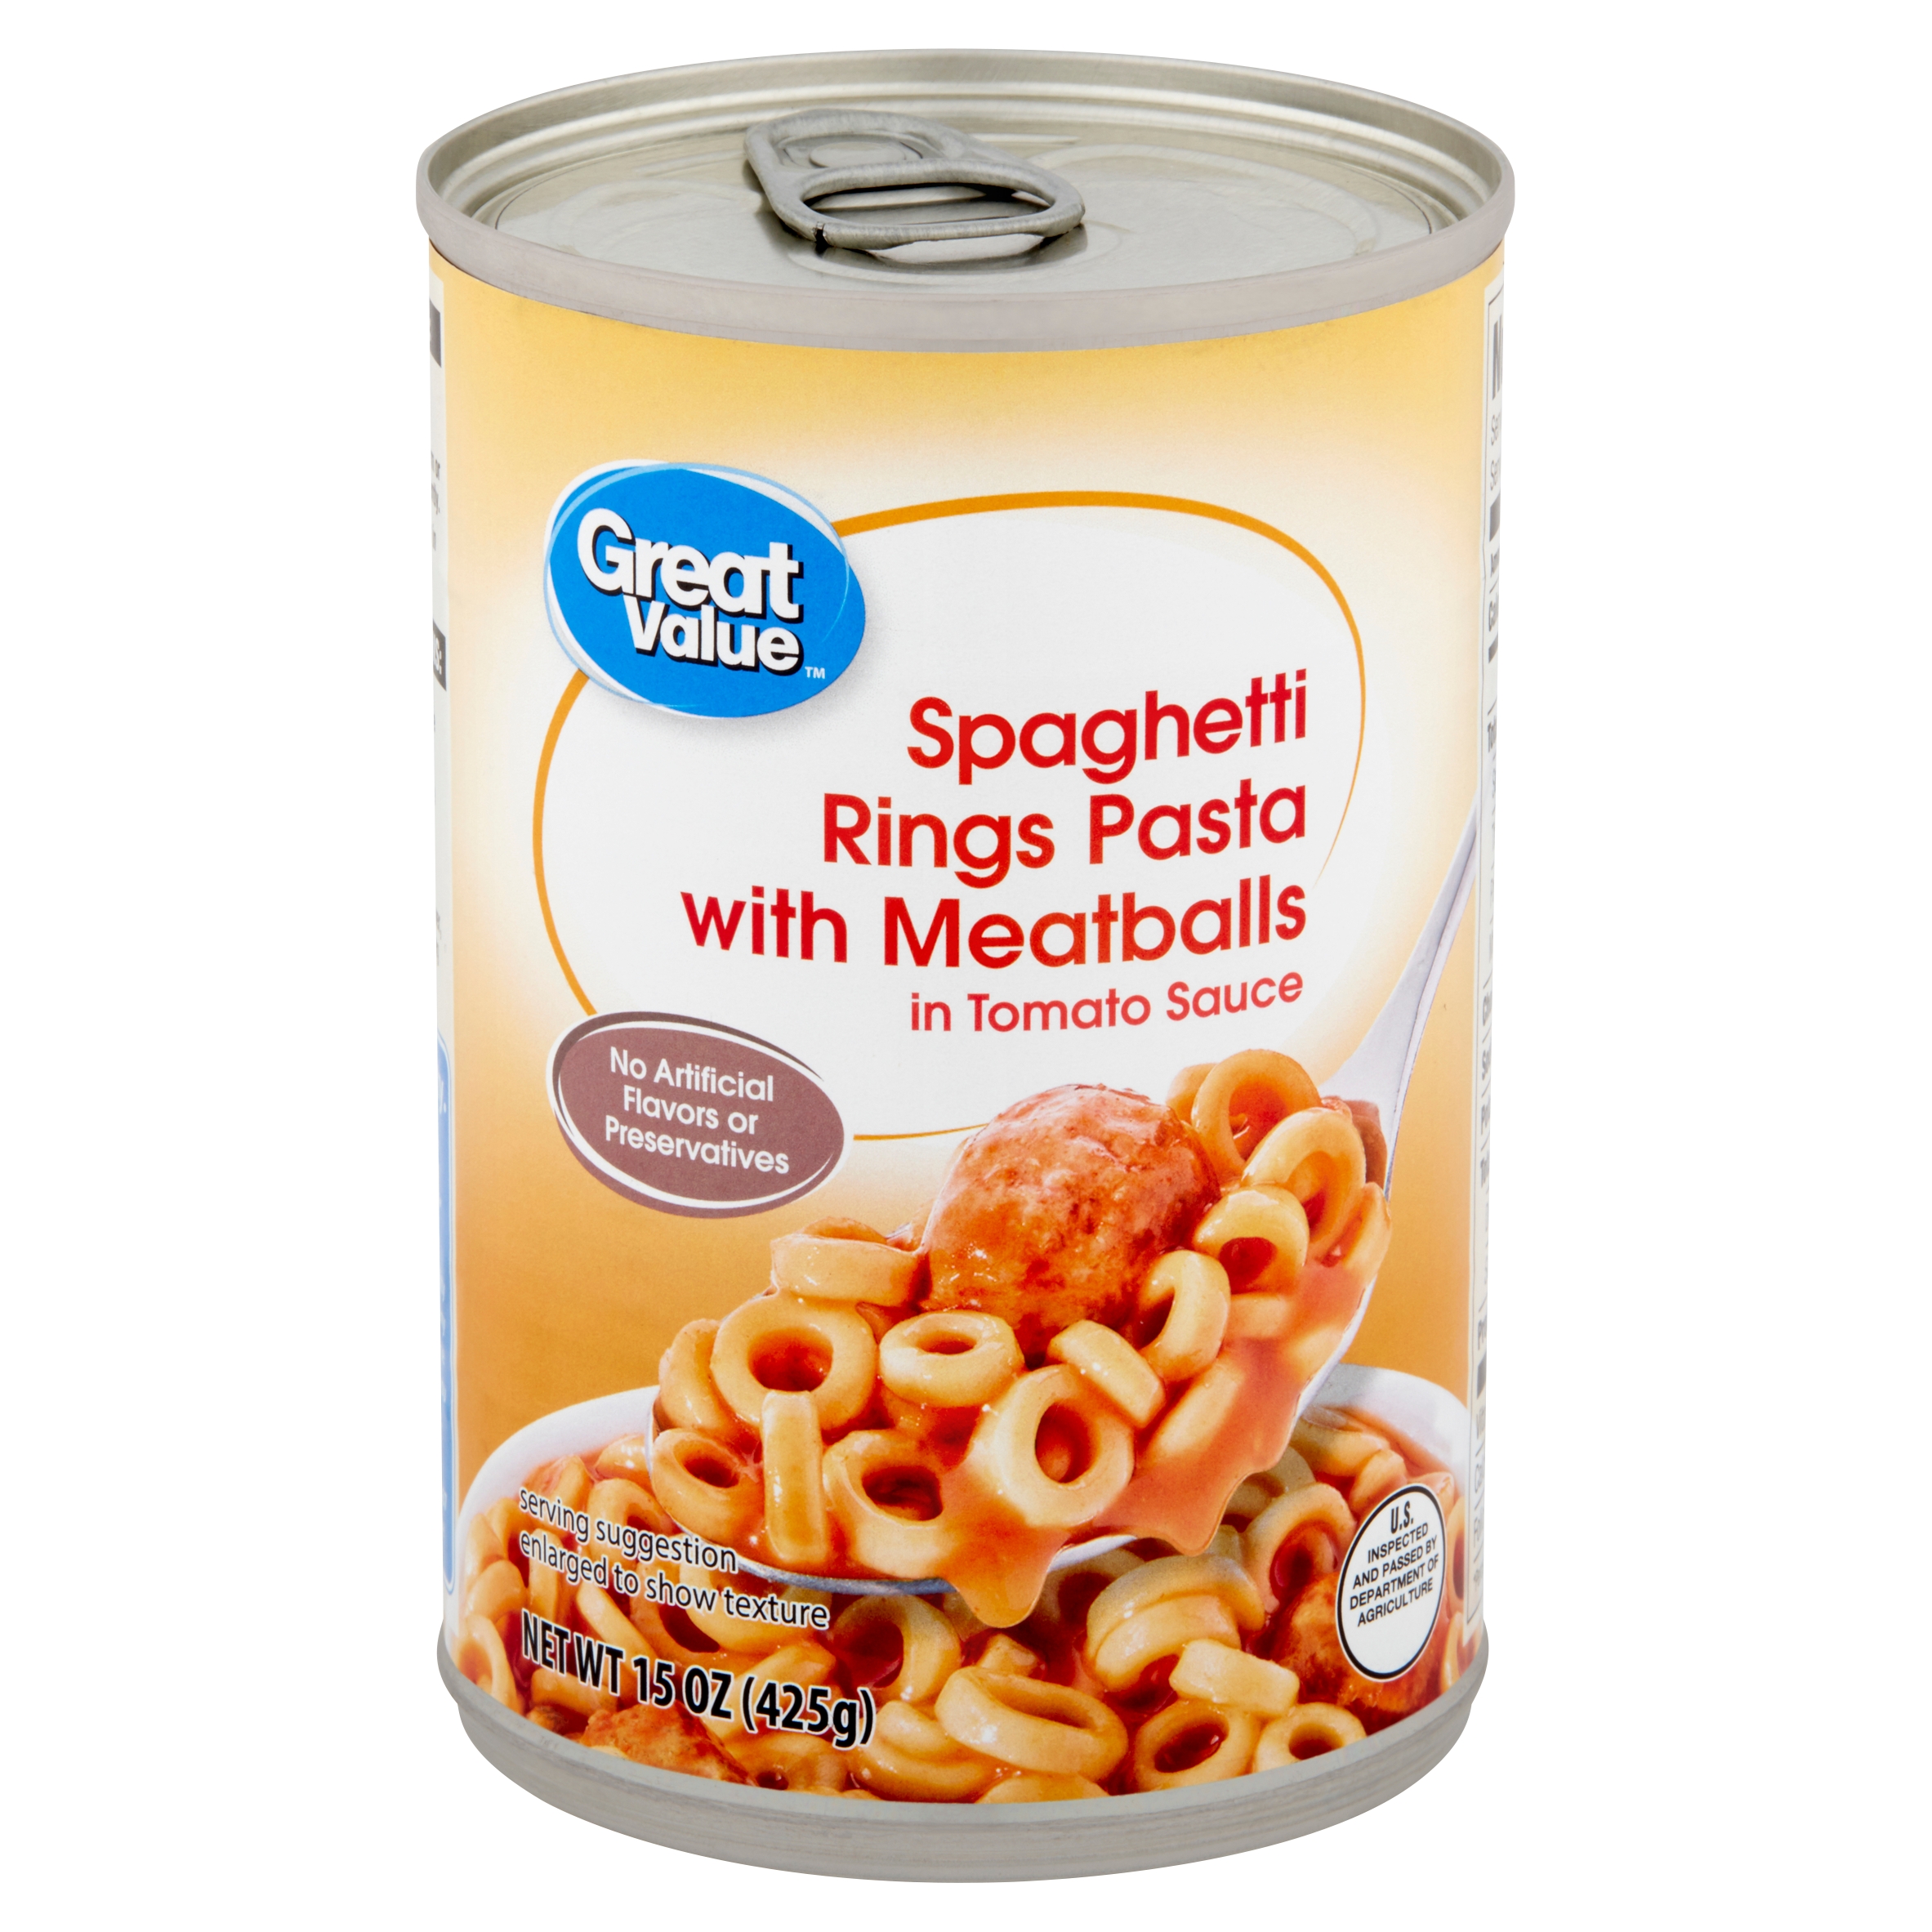 Great Value Spaghetti Rings Pasta with Meatballs in Tomato Sauce, 15 Oz Image